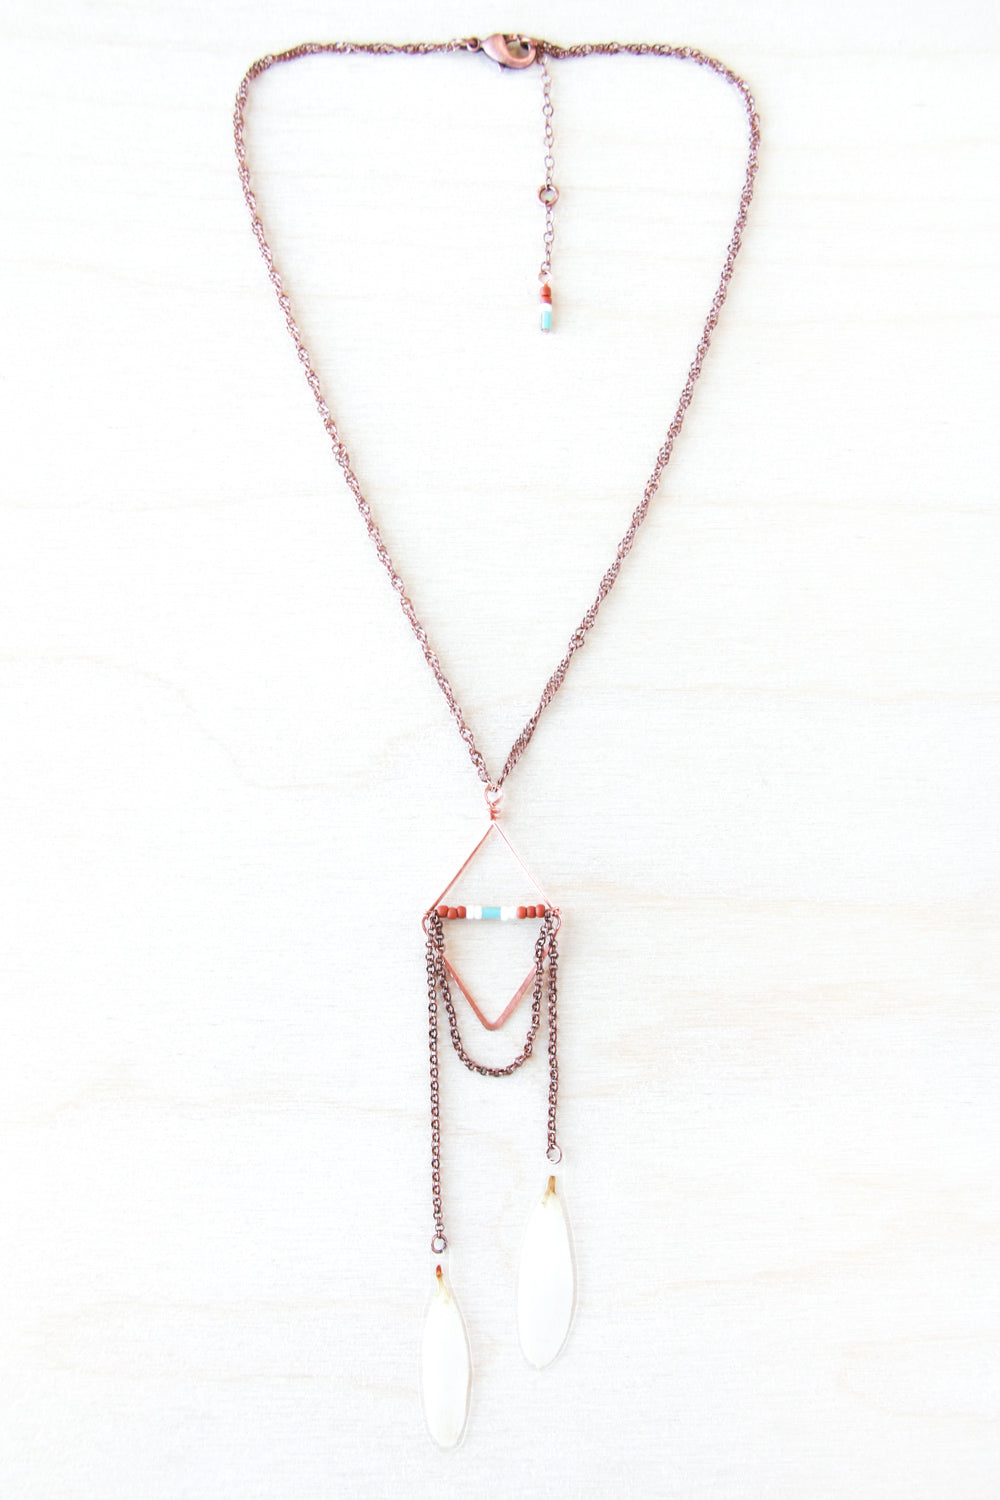 White Shasta Daisy Pressed Petal Necklace with Hammered Copper Diamond Hoop & Terracotta, Cream & Turquoise Glass Beads